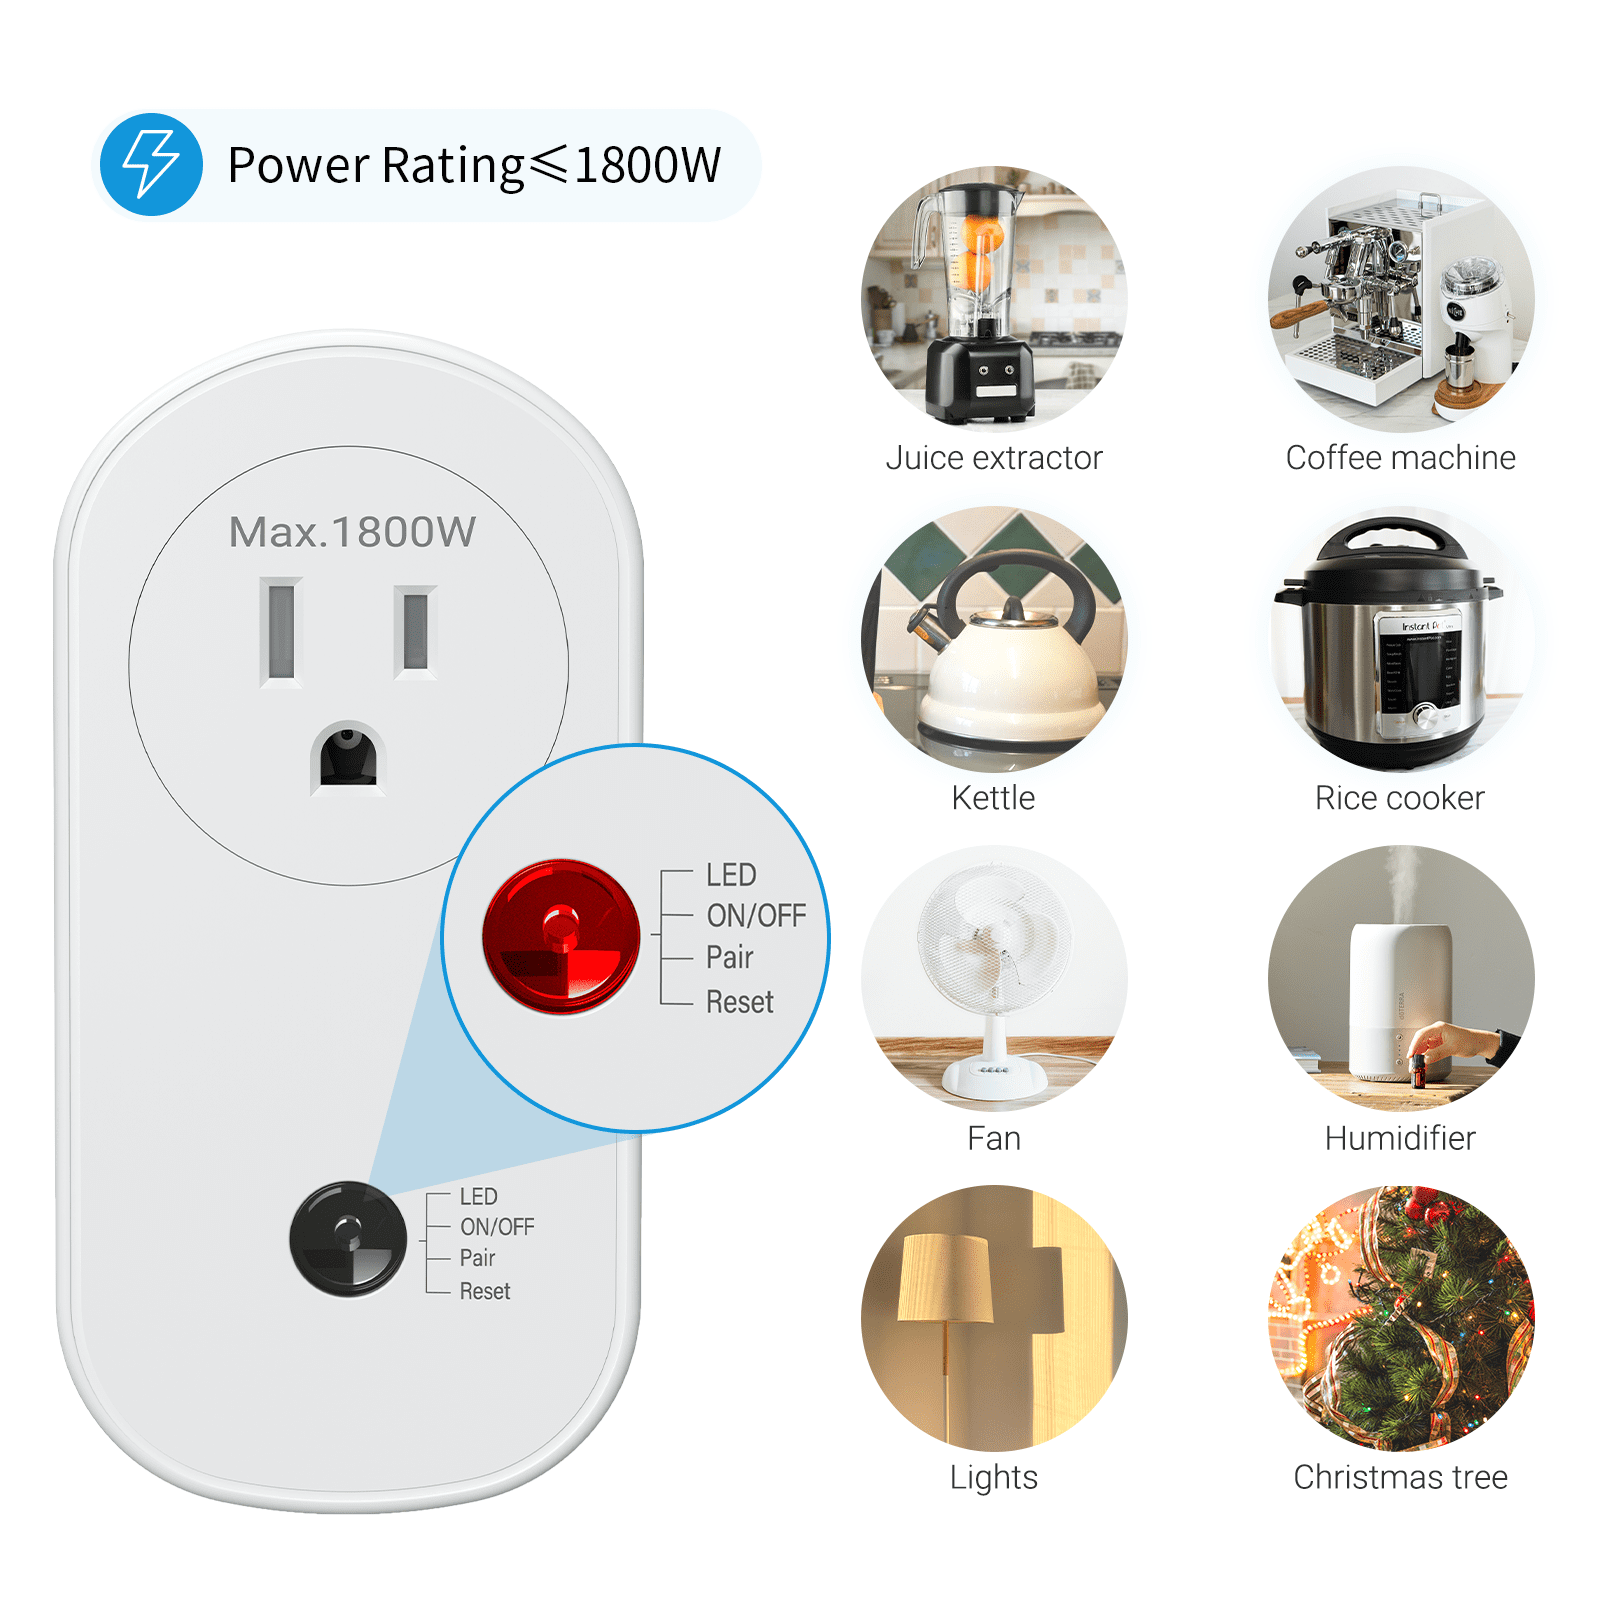 Wireless Remote Control Plugs, 40m/130ft Range for Lights, Appliances, 1 Surnice Outlets& 1 Remote, White